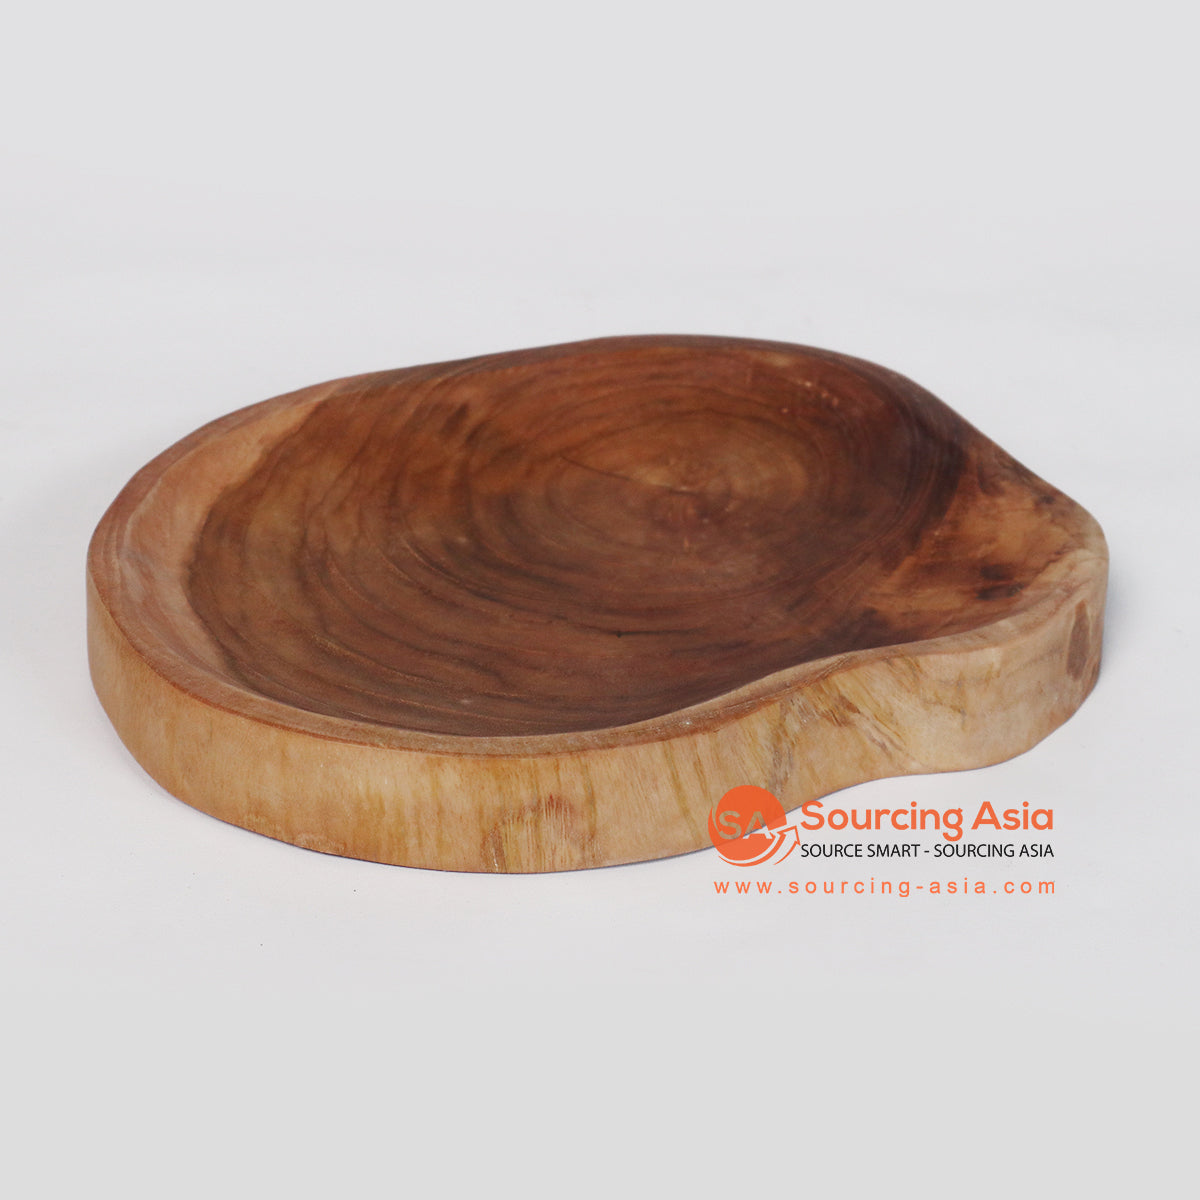 AJE001 NATURAL WOODEN CHOPPING BOARD